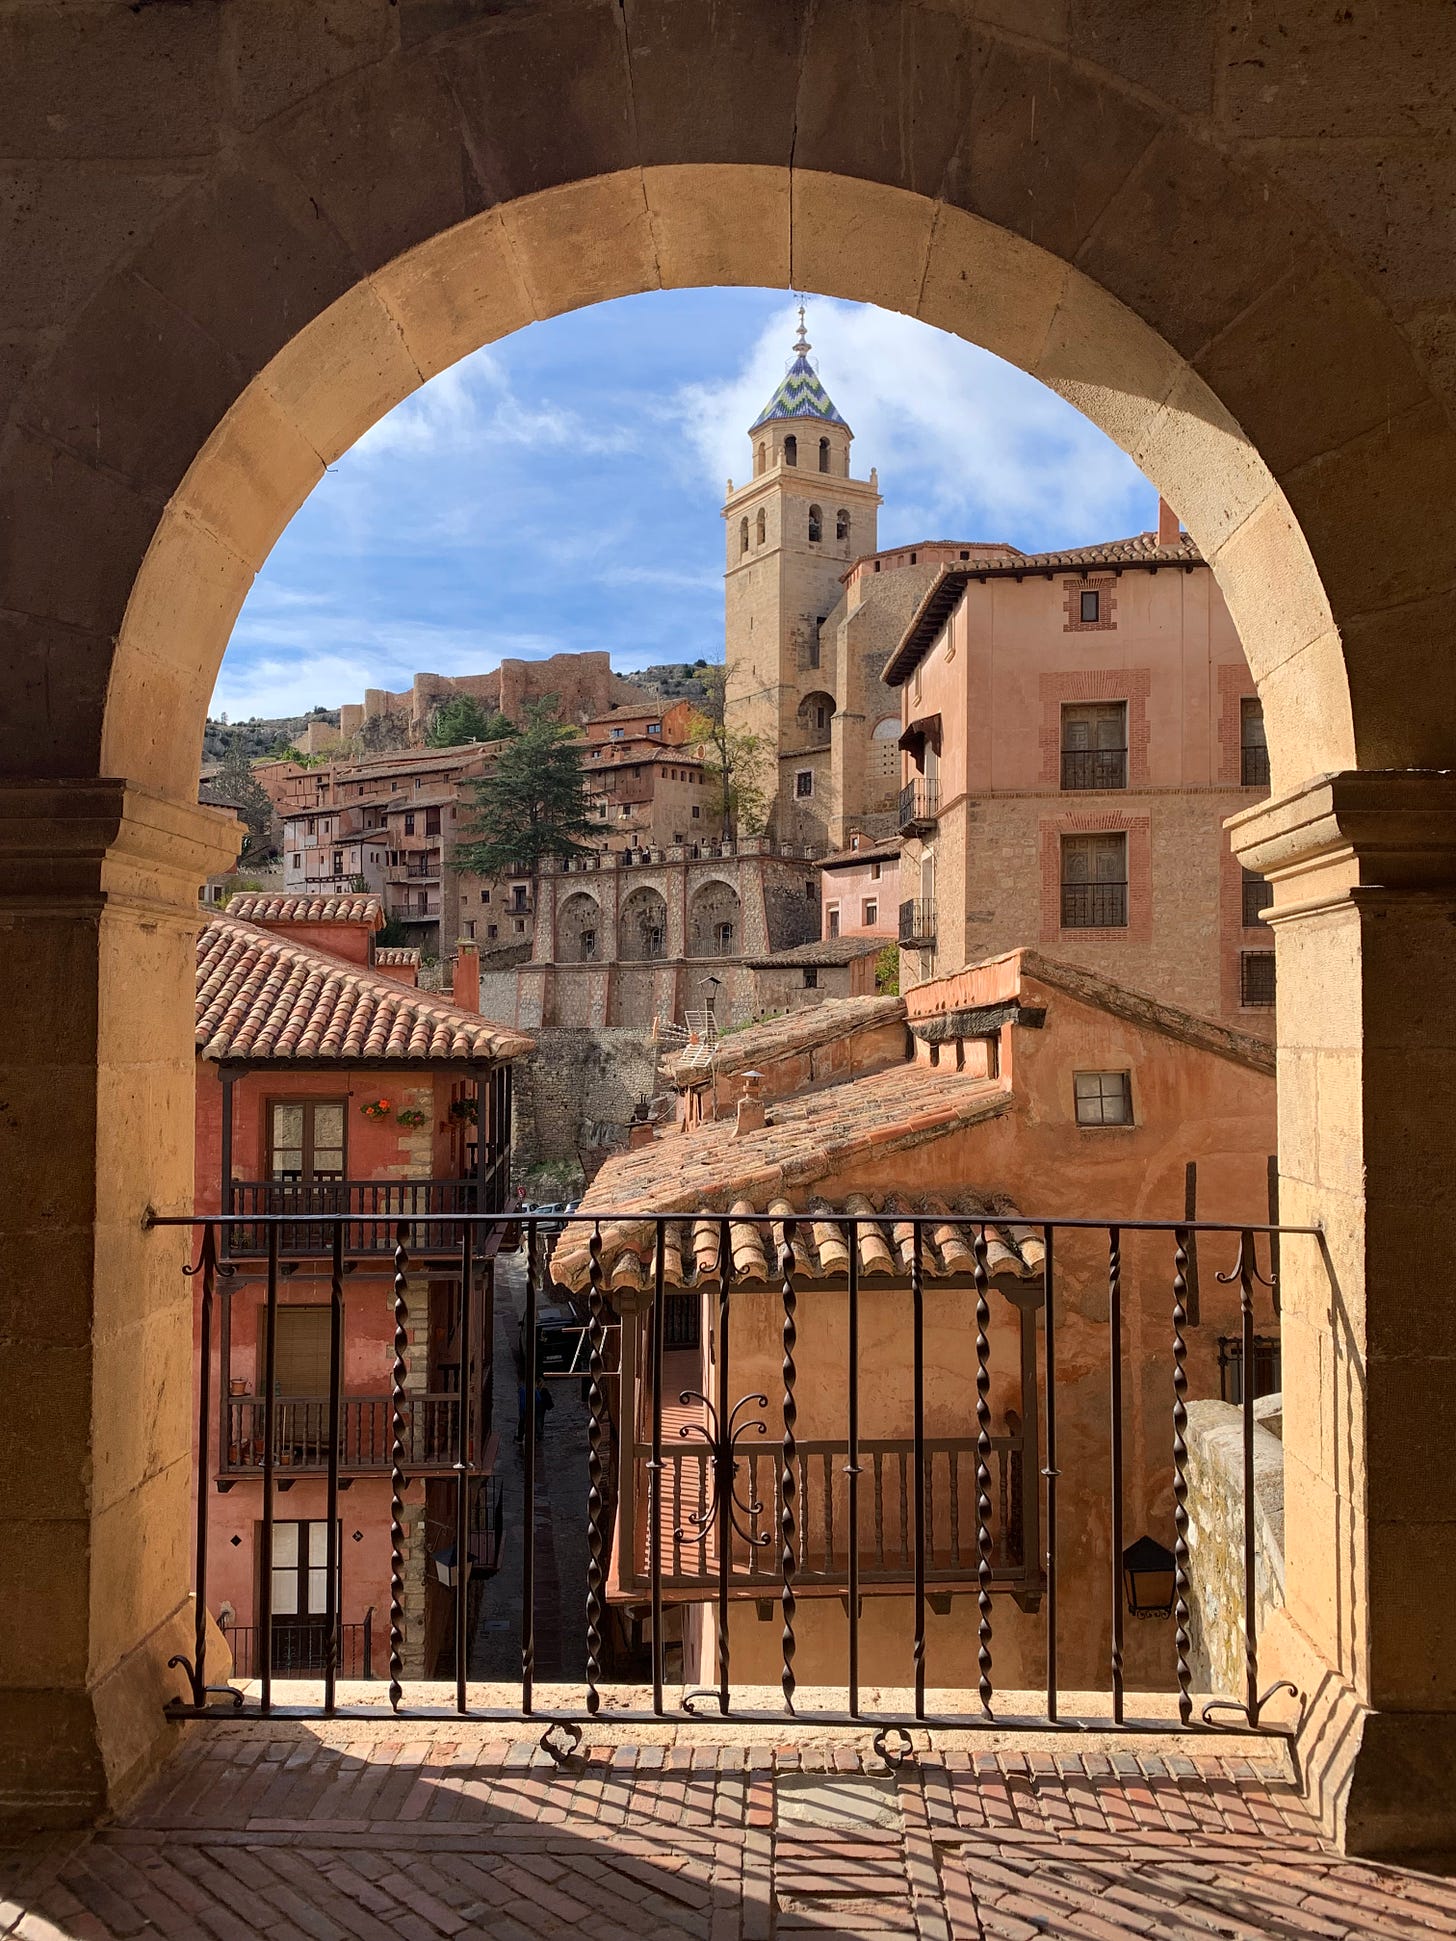 a view of the town and cathedral through an archway